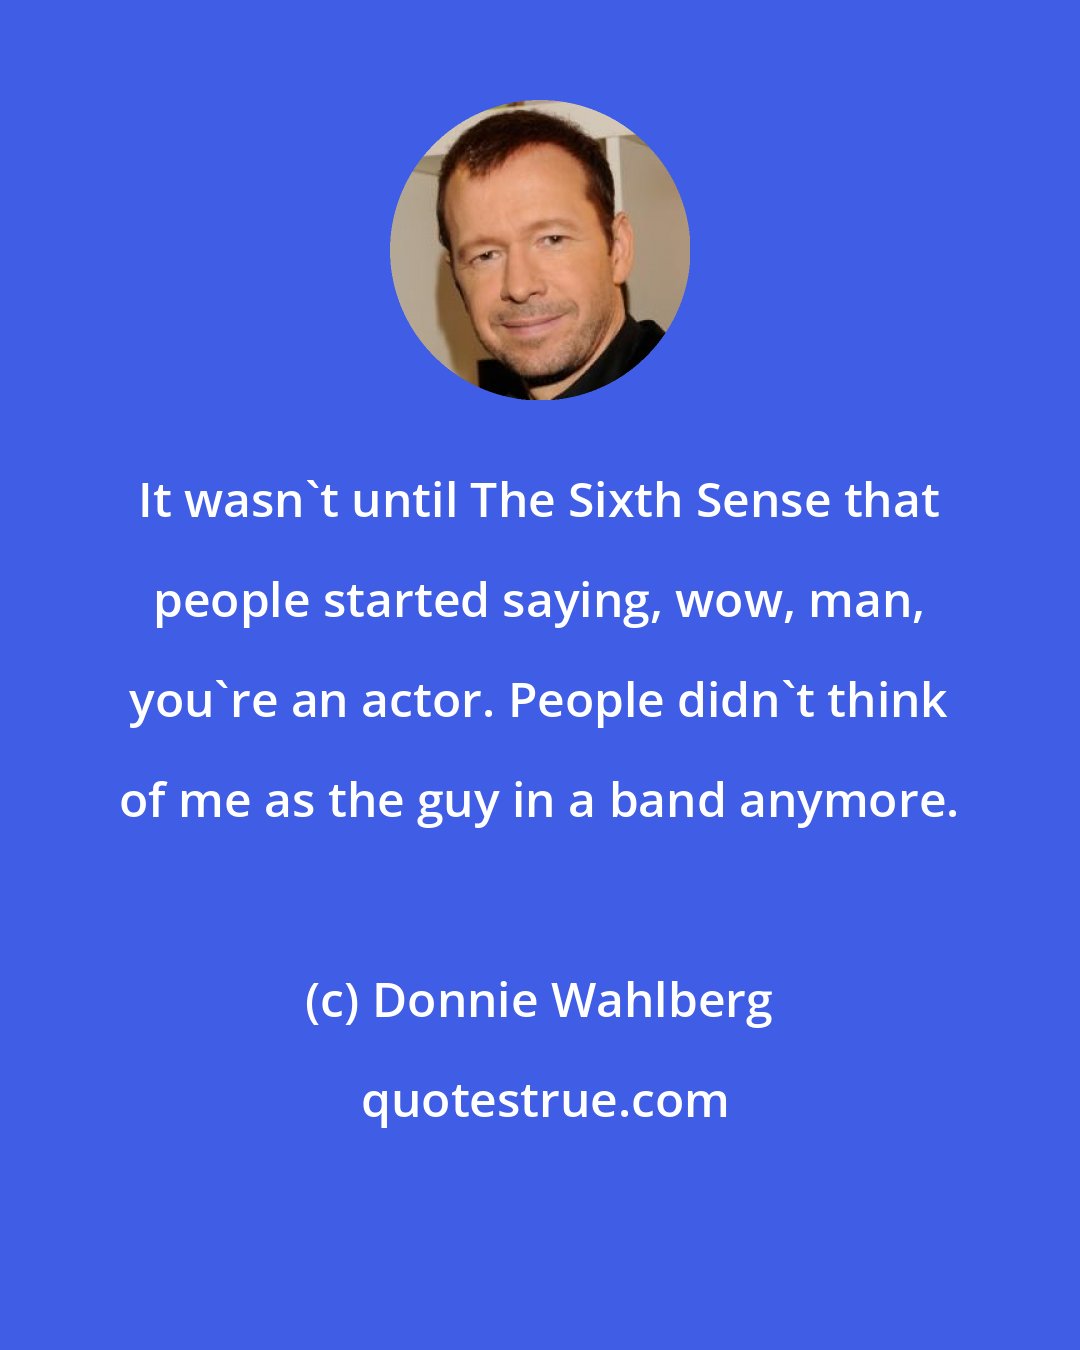 Donnie Wahlberg: It wasn't until The Sixth Sense that people started saying, wow, man, you're an actor. People didn't think of me as the guy in a band anymore.